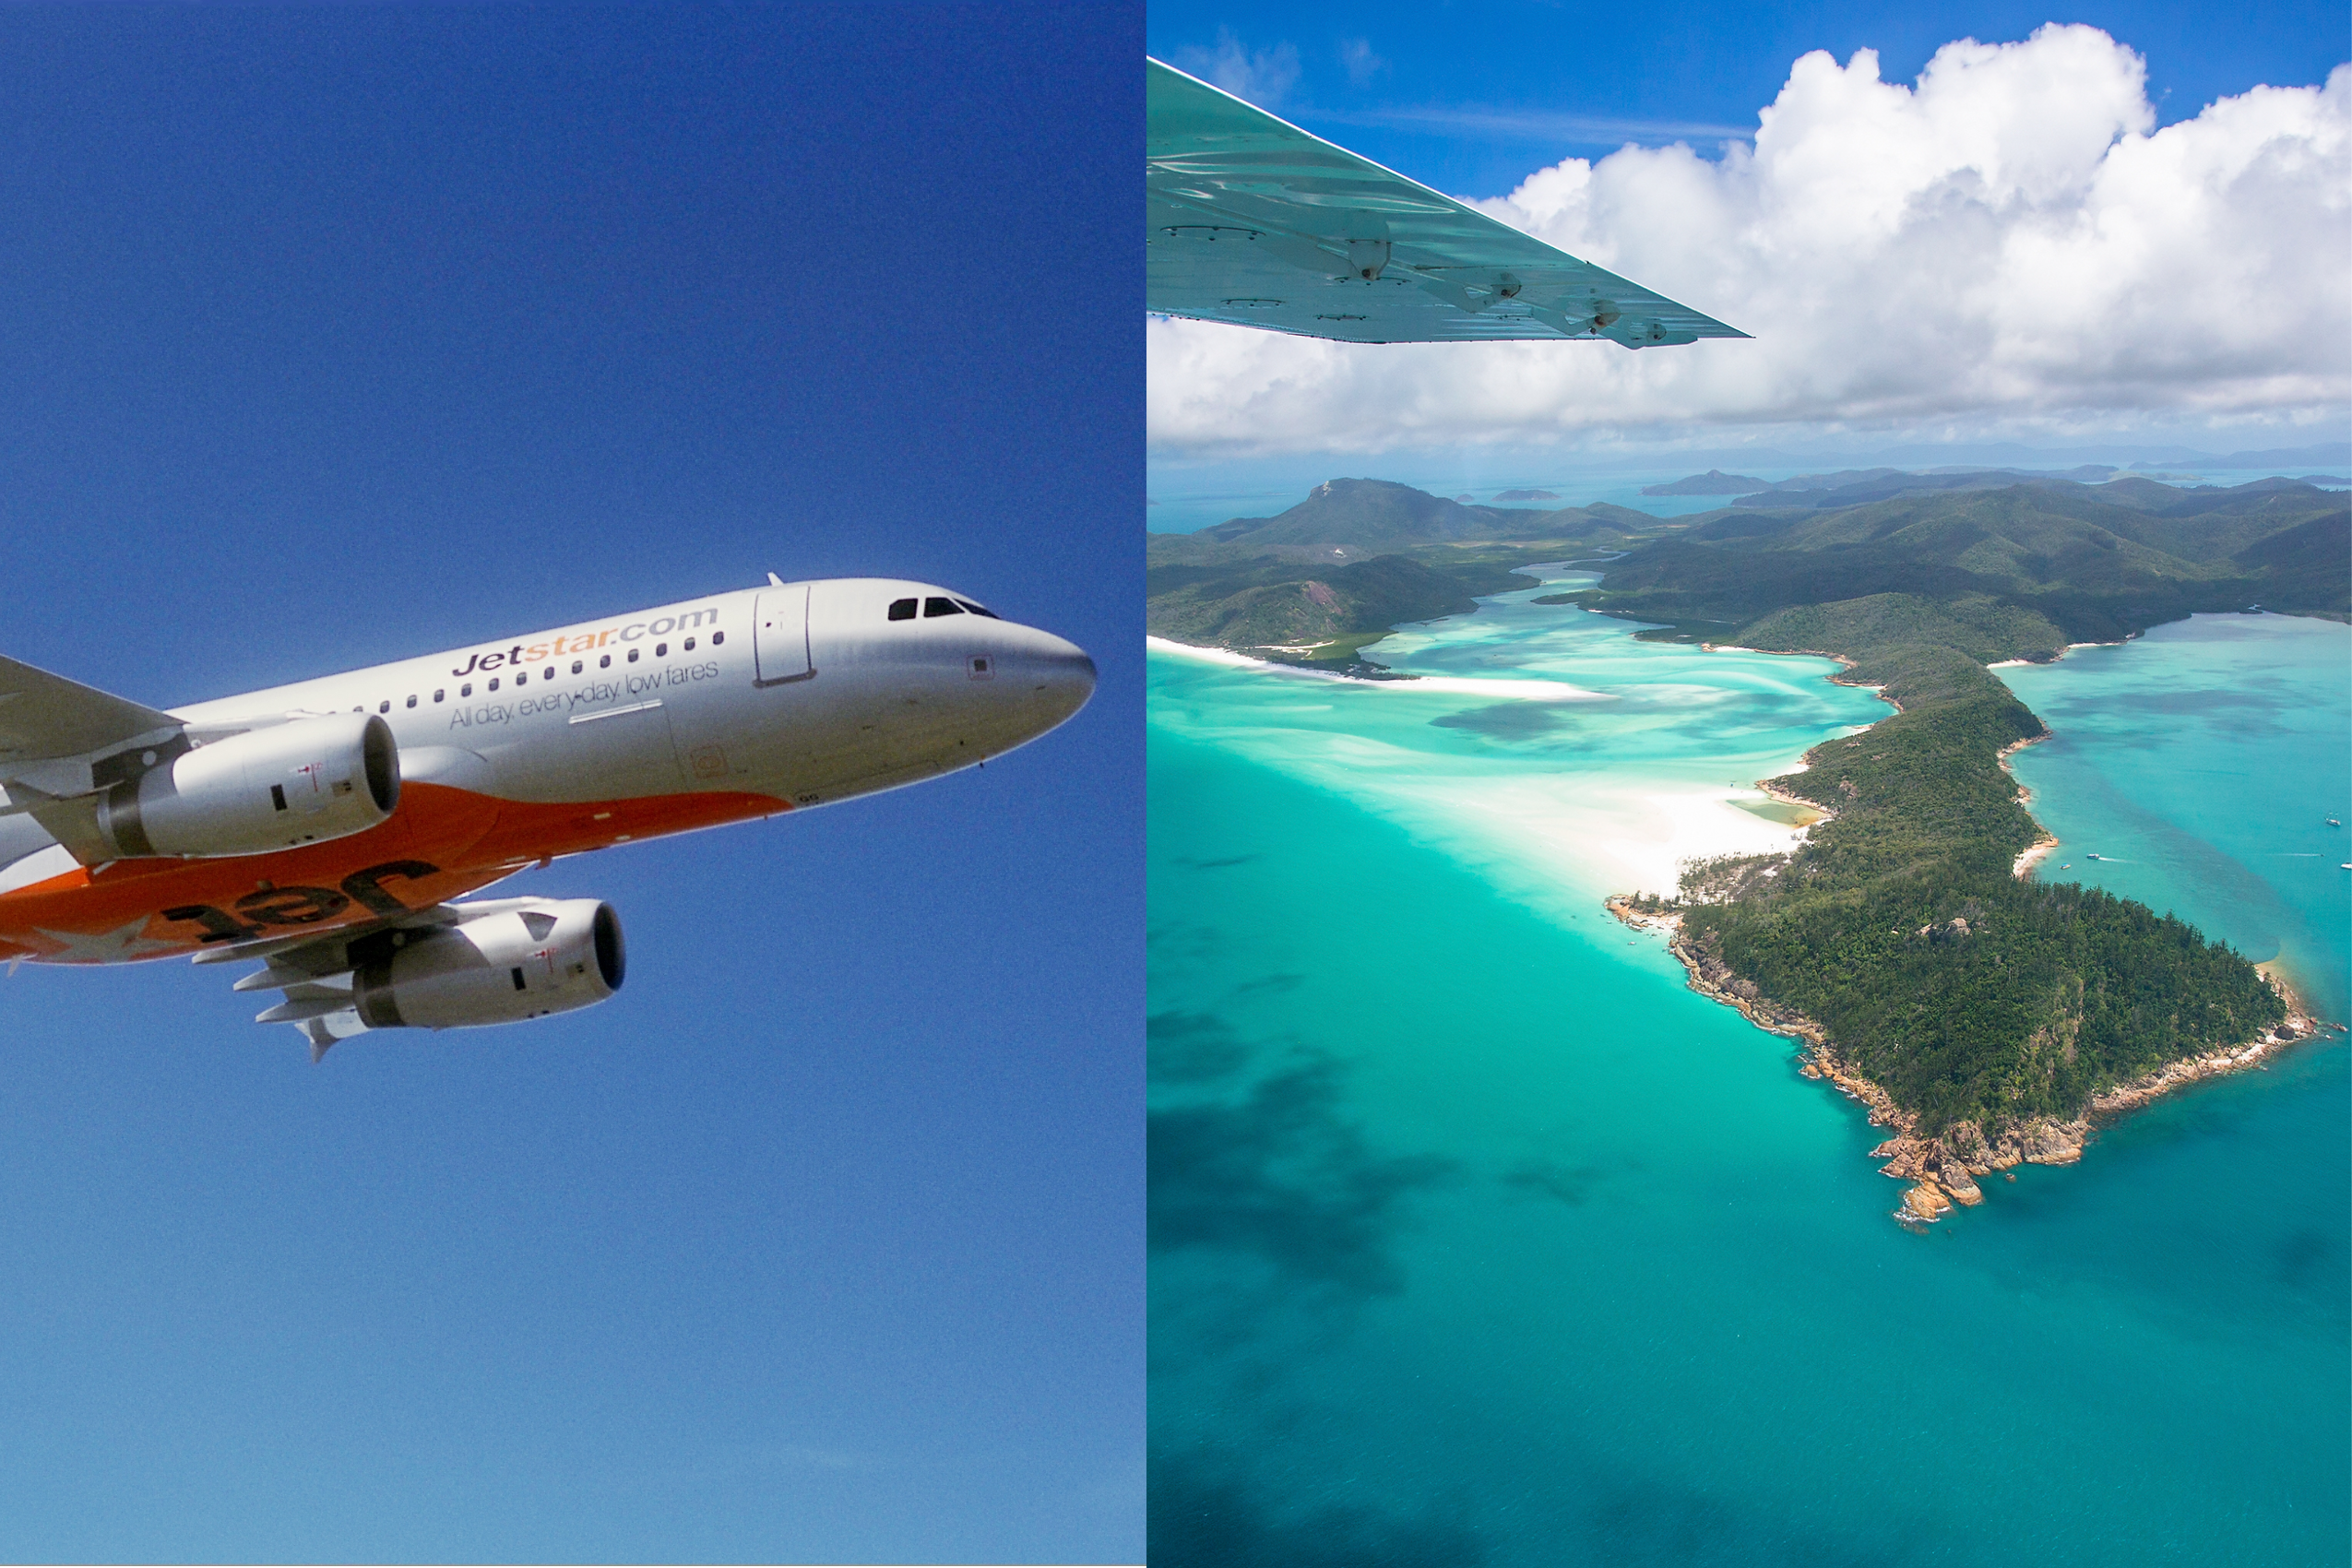 YES: Jetstar Has Gone All In With One-Way Domestic Flights From $35 Like It’s 2019 Again